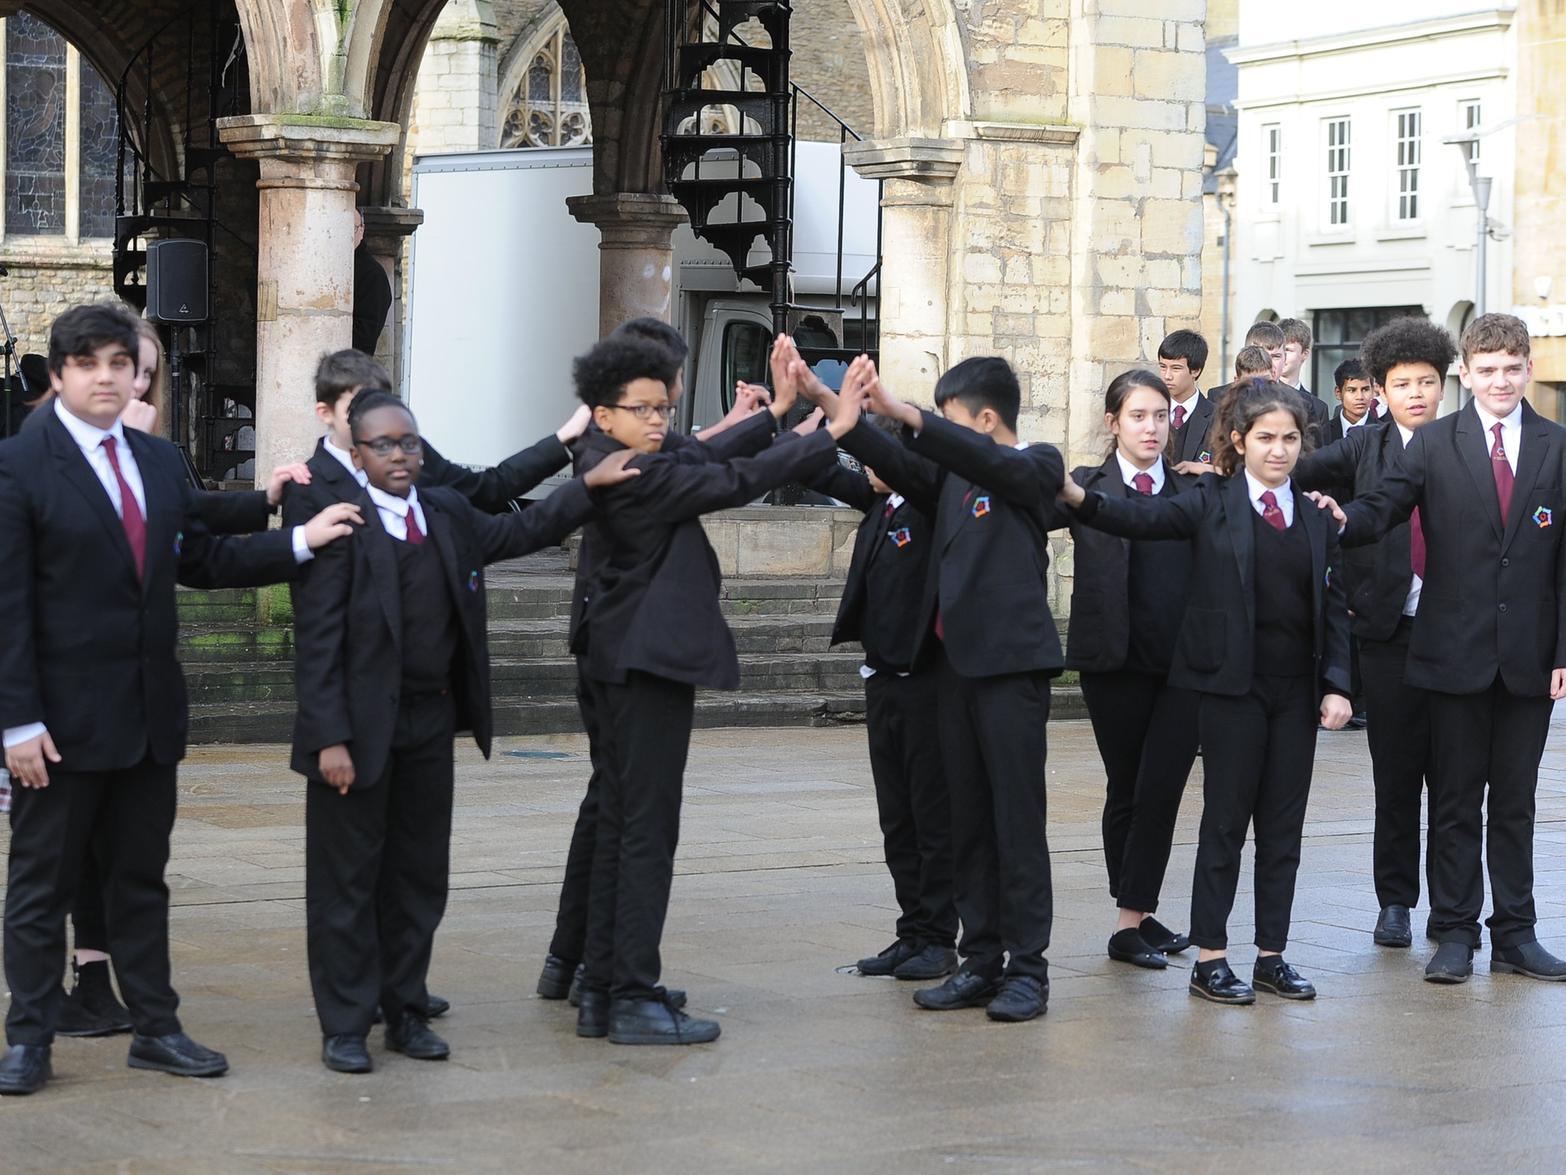 Pupils perform drama in Cathedral Square